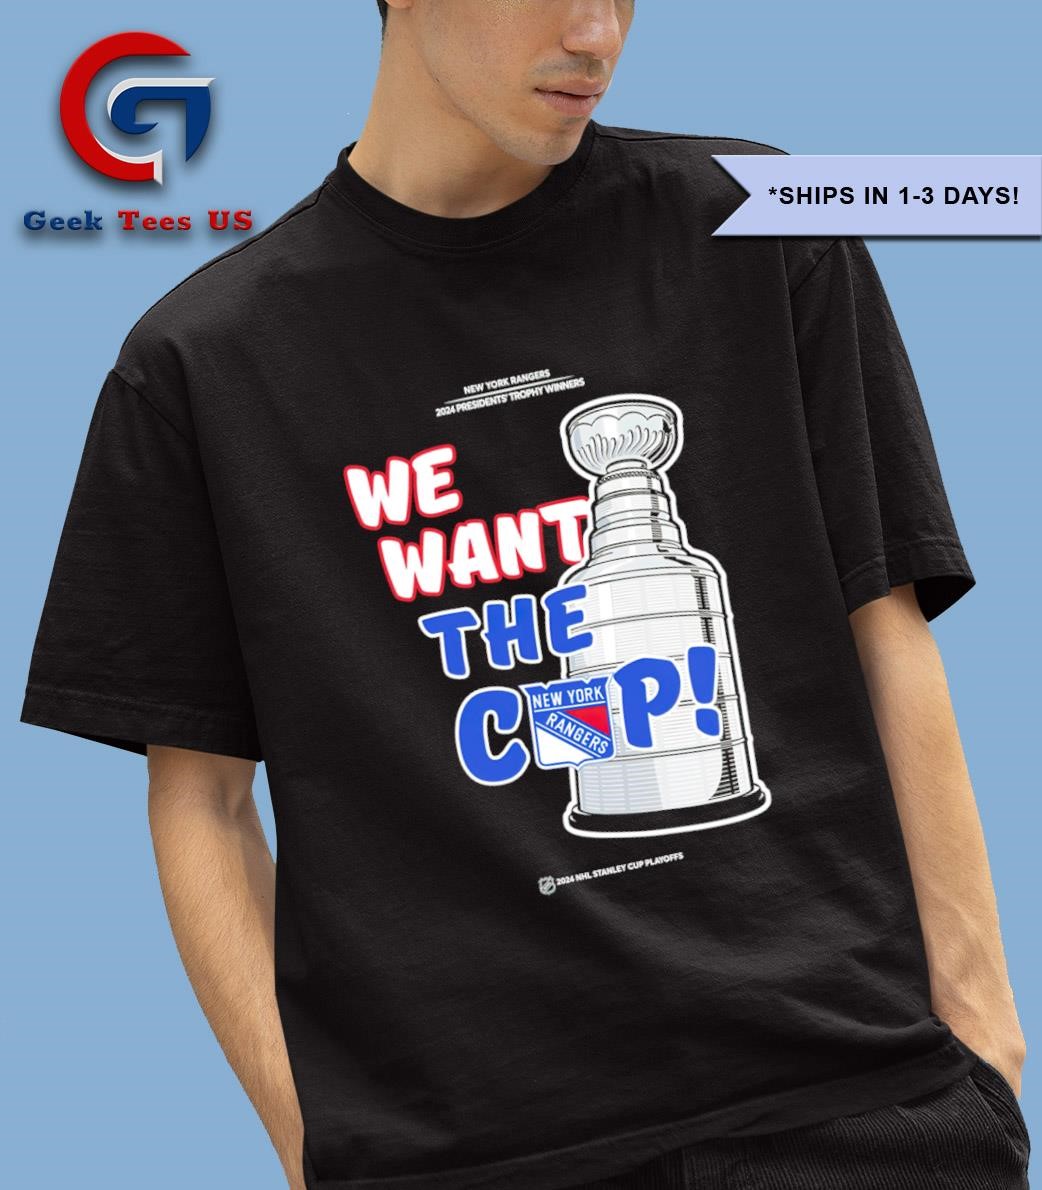 We want the cup New York Rangers Hockey 2024 NHL Stanley Cup Playoffs logo shirt
geekteesus.com/product/we-wan…
#shirt #trending #gift #geekteesus #geekshirt #GEEKS #NewYorkRangers #RangersFC #Rangers #hockey #NewYorkForever  #NHL #StanleyCupPlayoffs #Playoffs2024